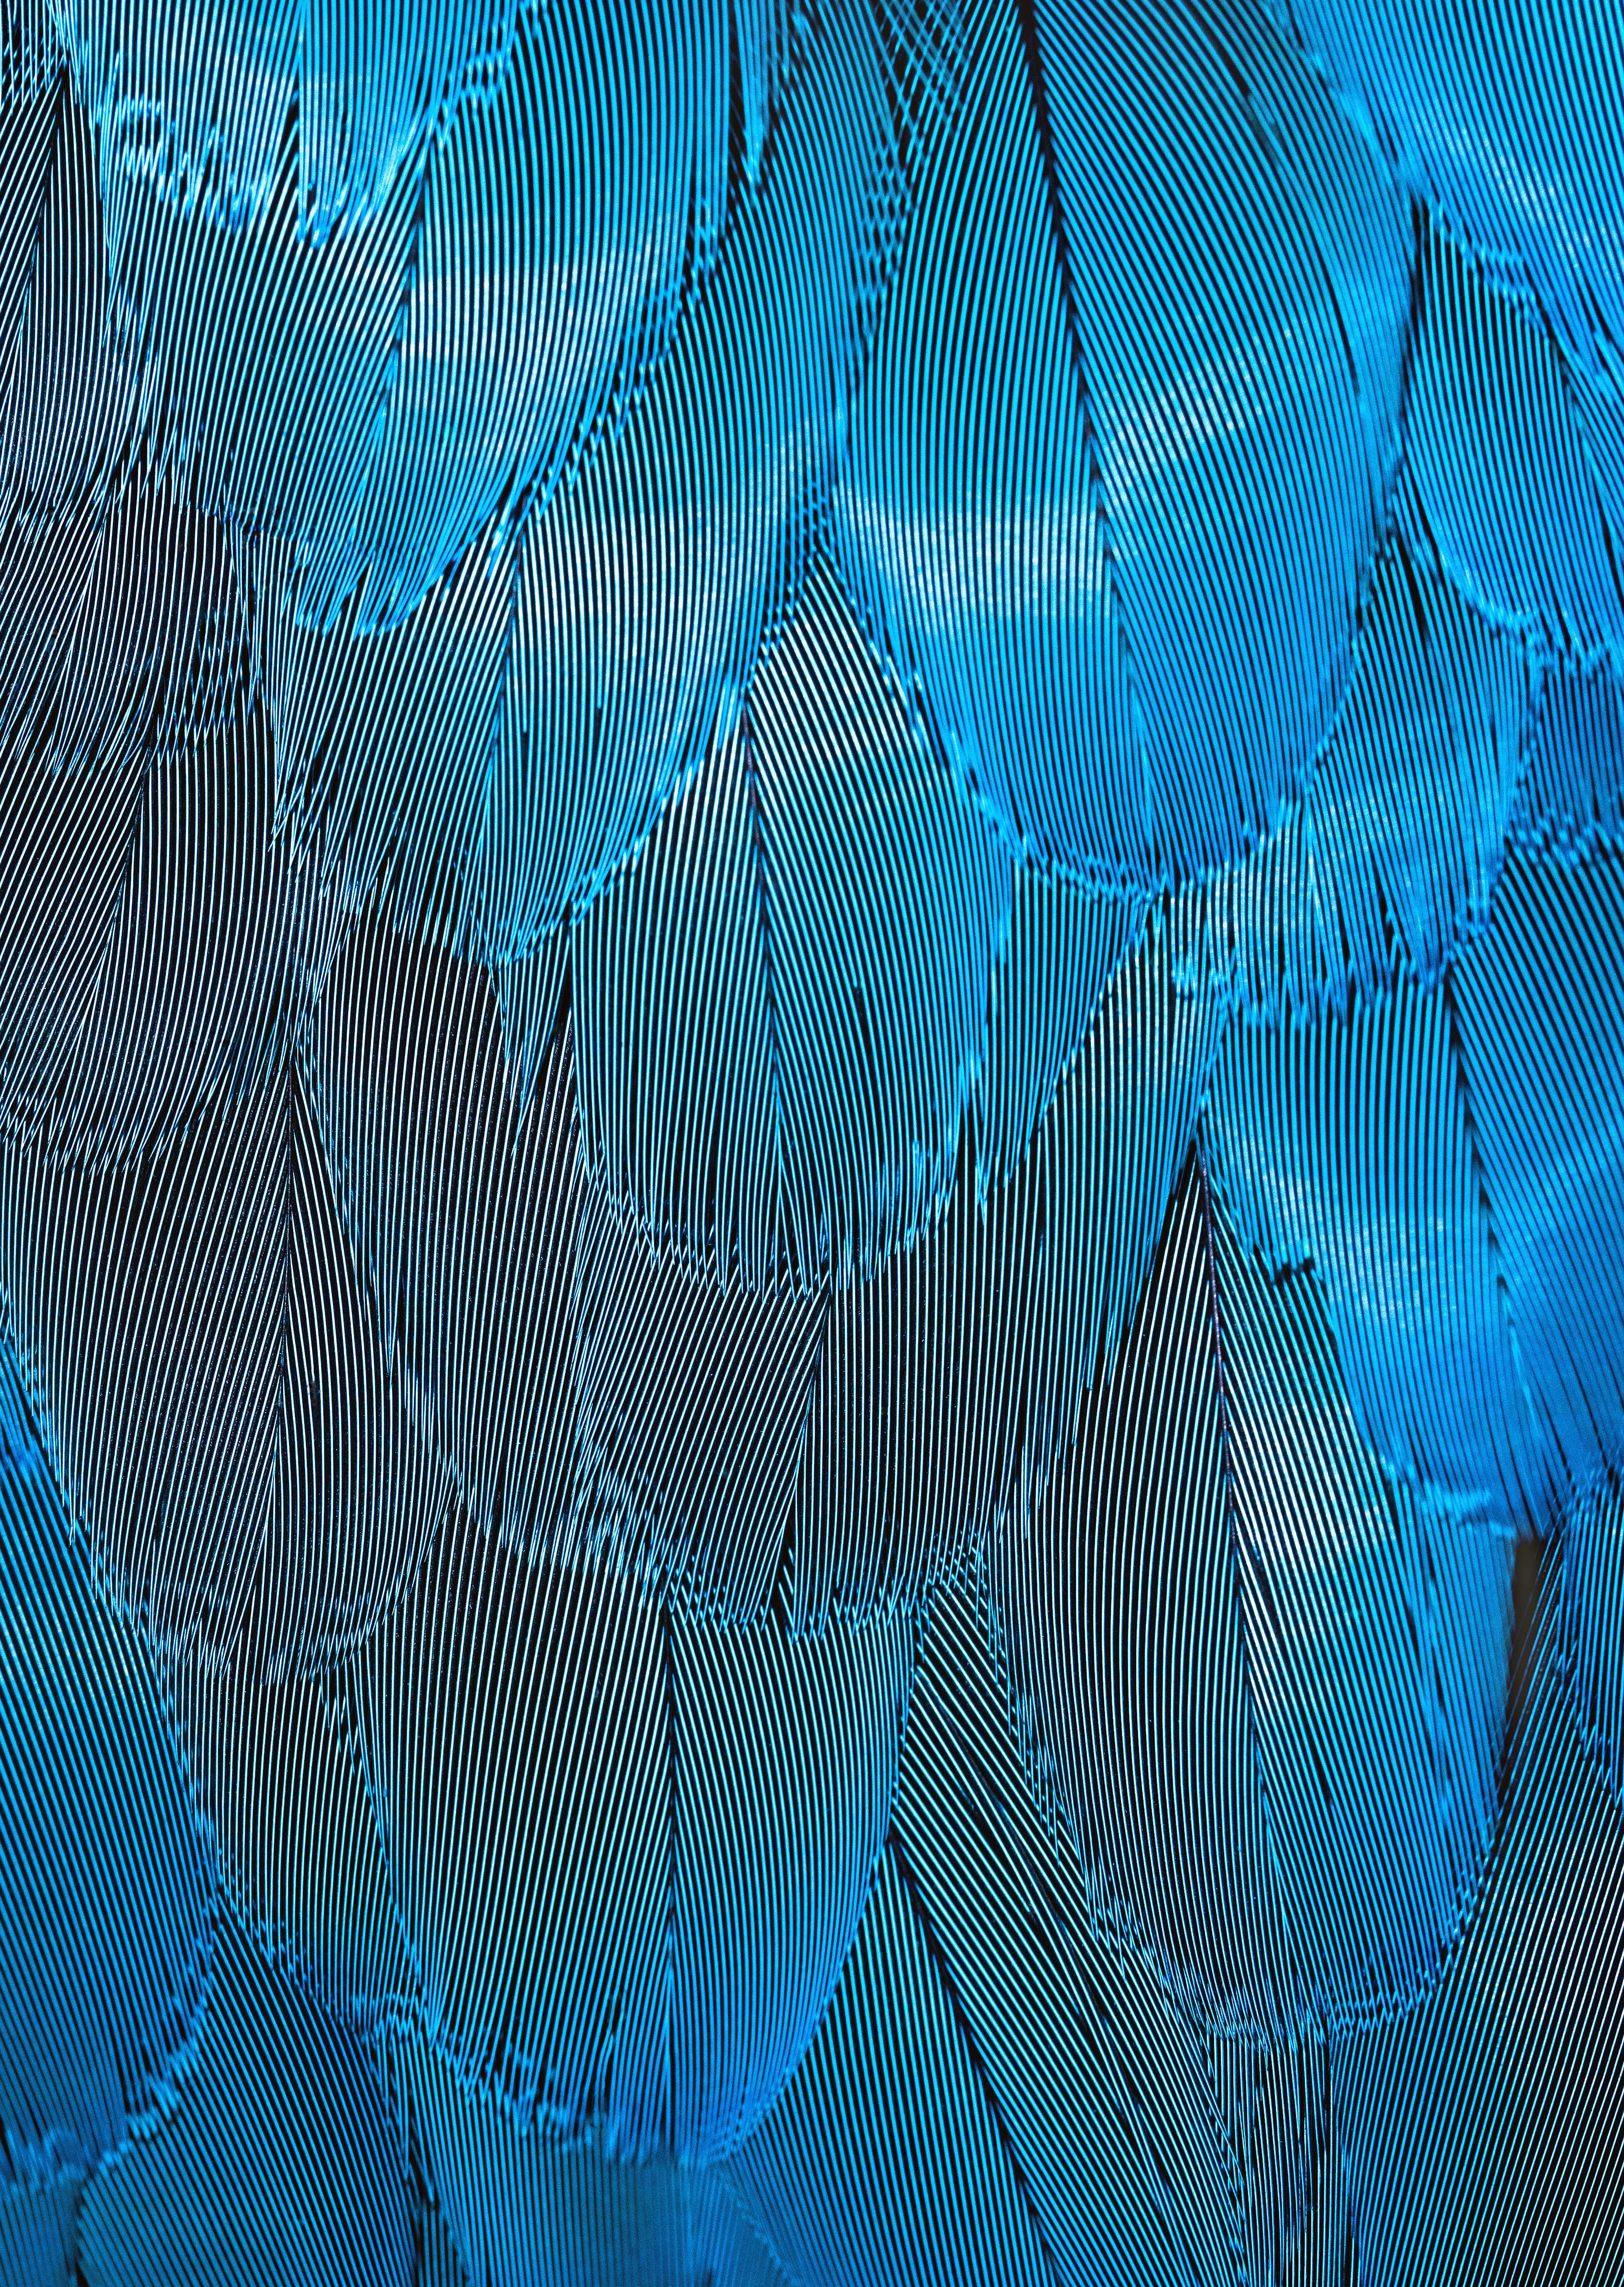 Free HD macro, feather, textures, blue, texture, iridescent